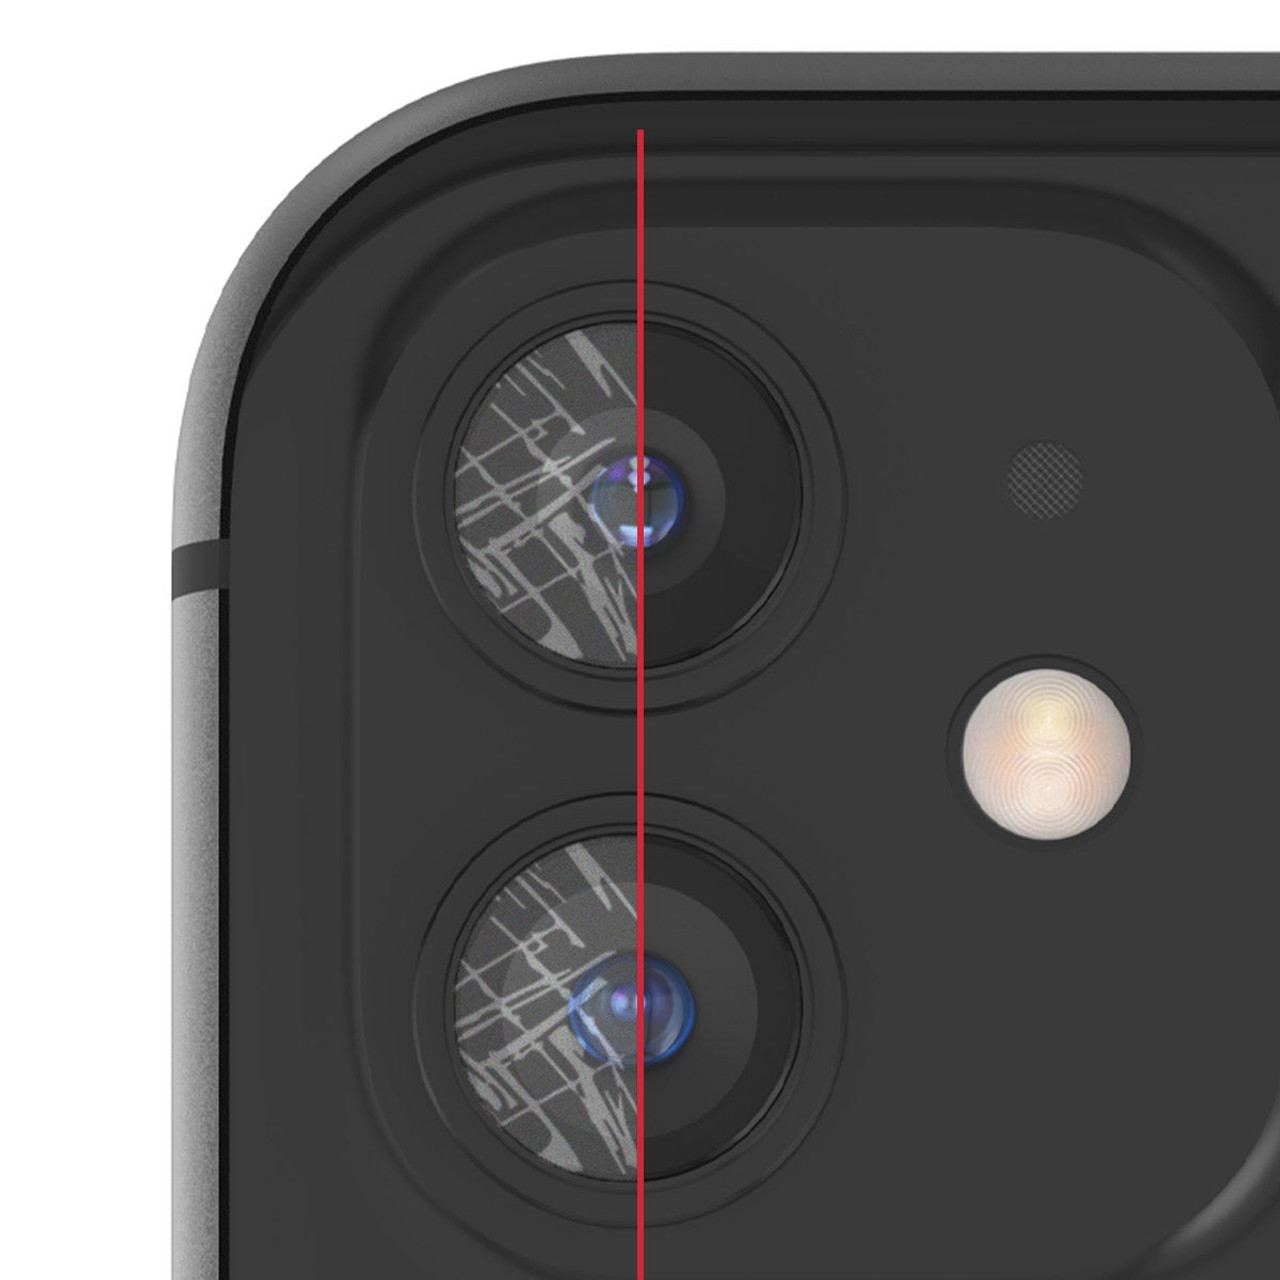 5 Tips to Fix iPhone or Samsung Scratched Camera Lens